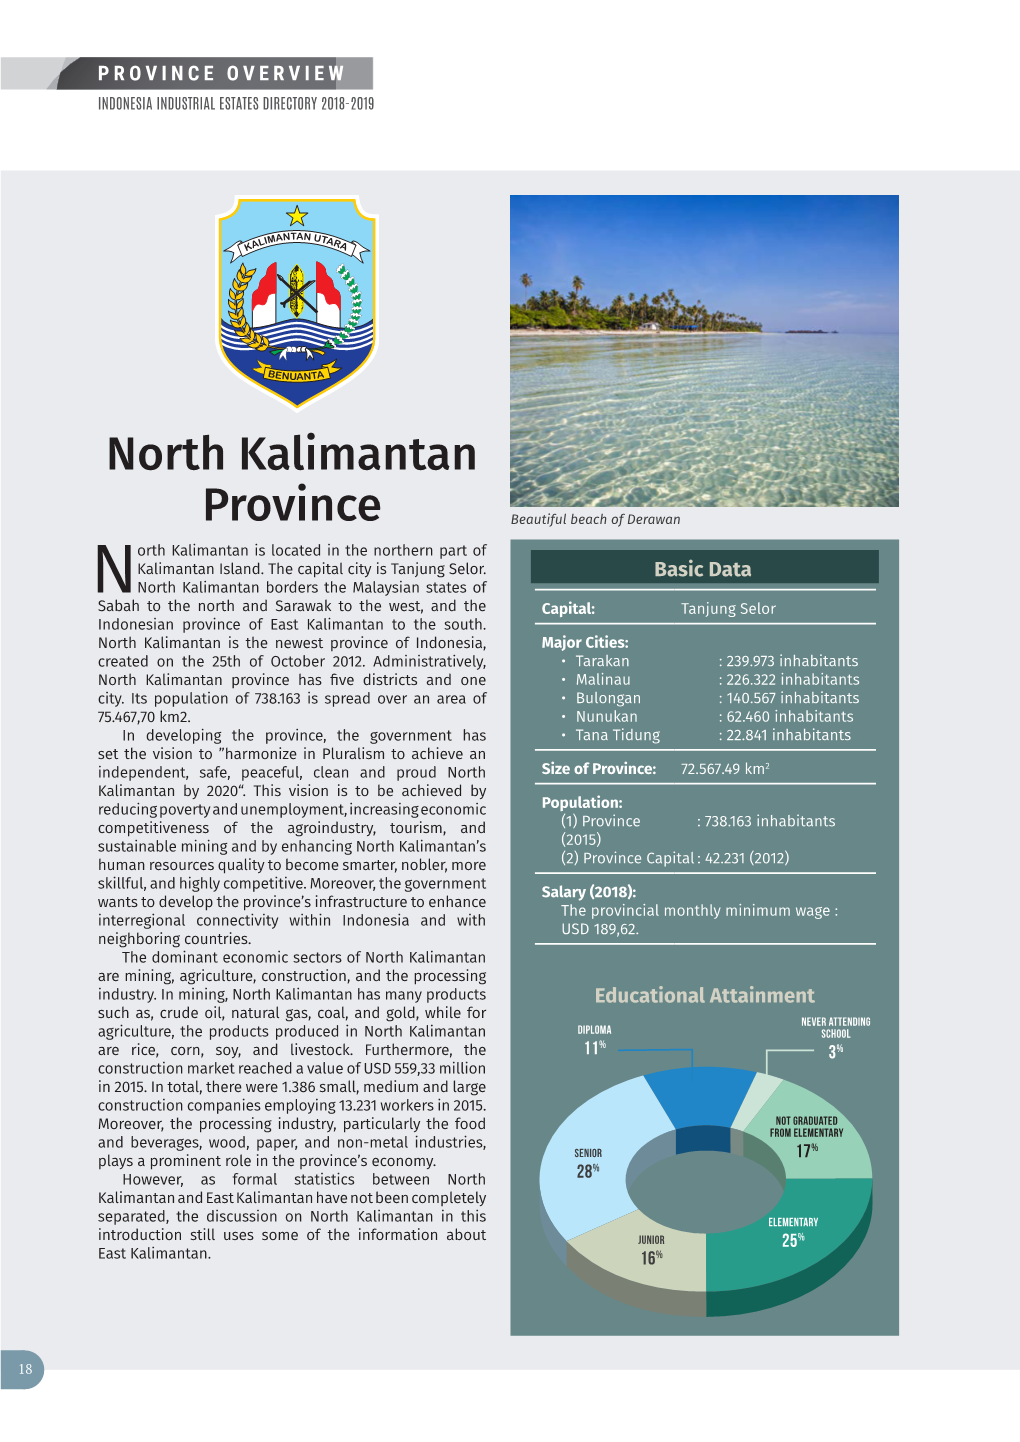 North Kalimantan Province Has Five Districts and One • Malinau : 226.322 Inhabitants City